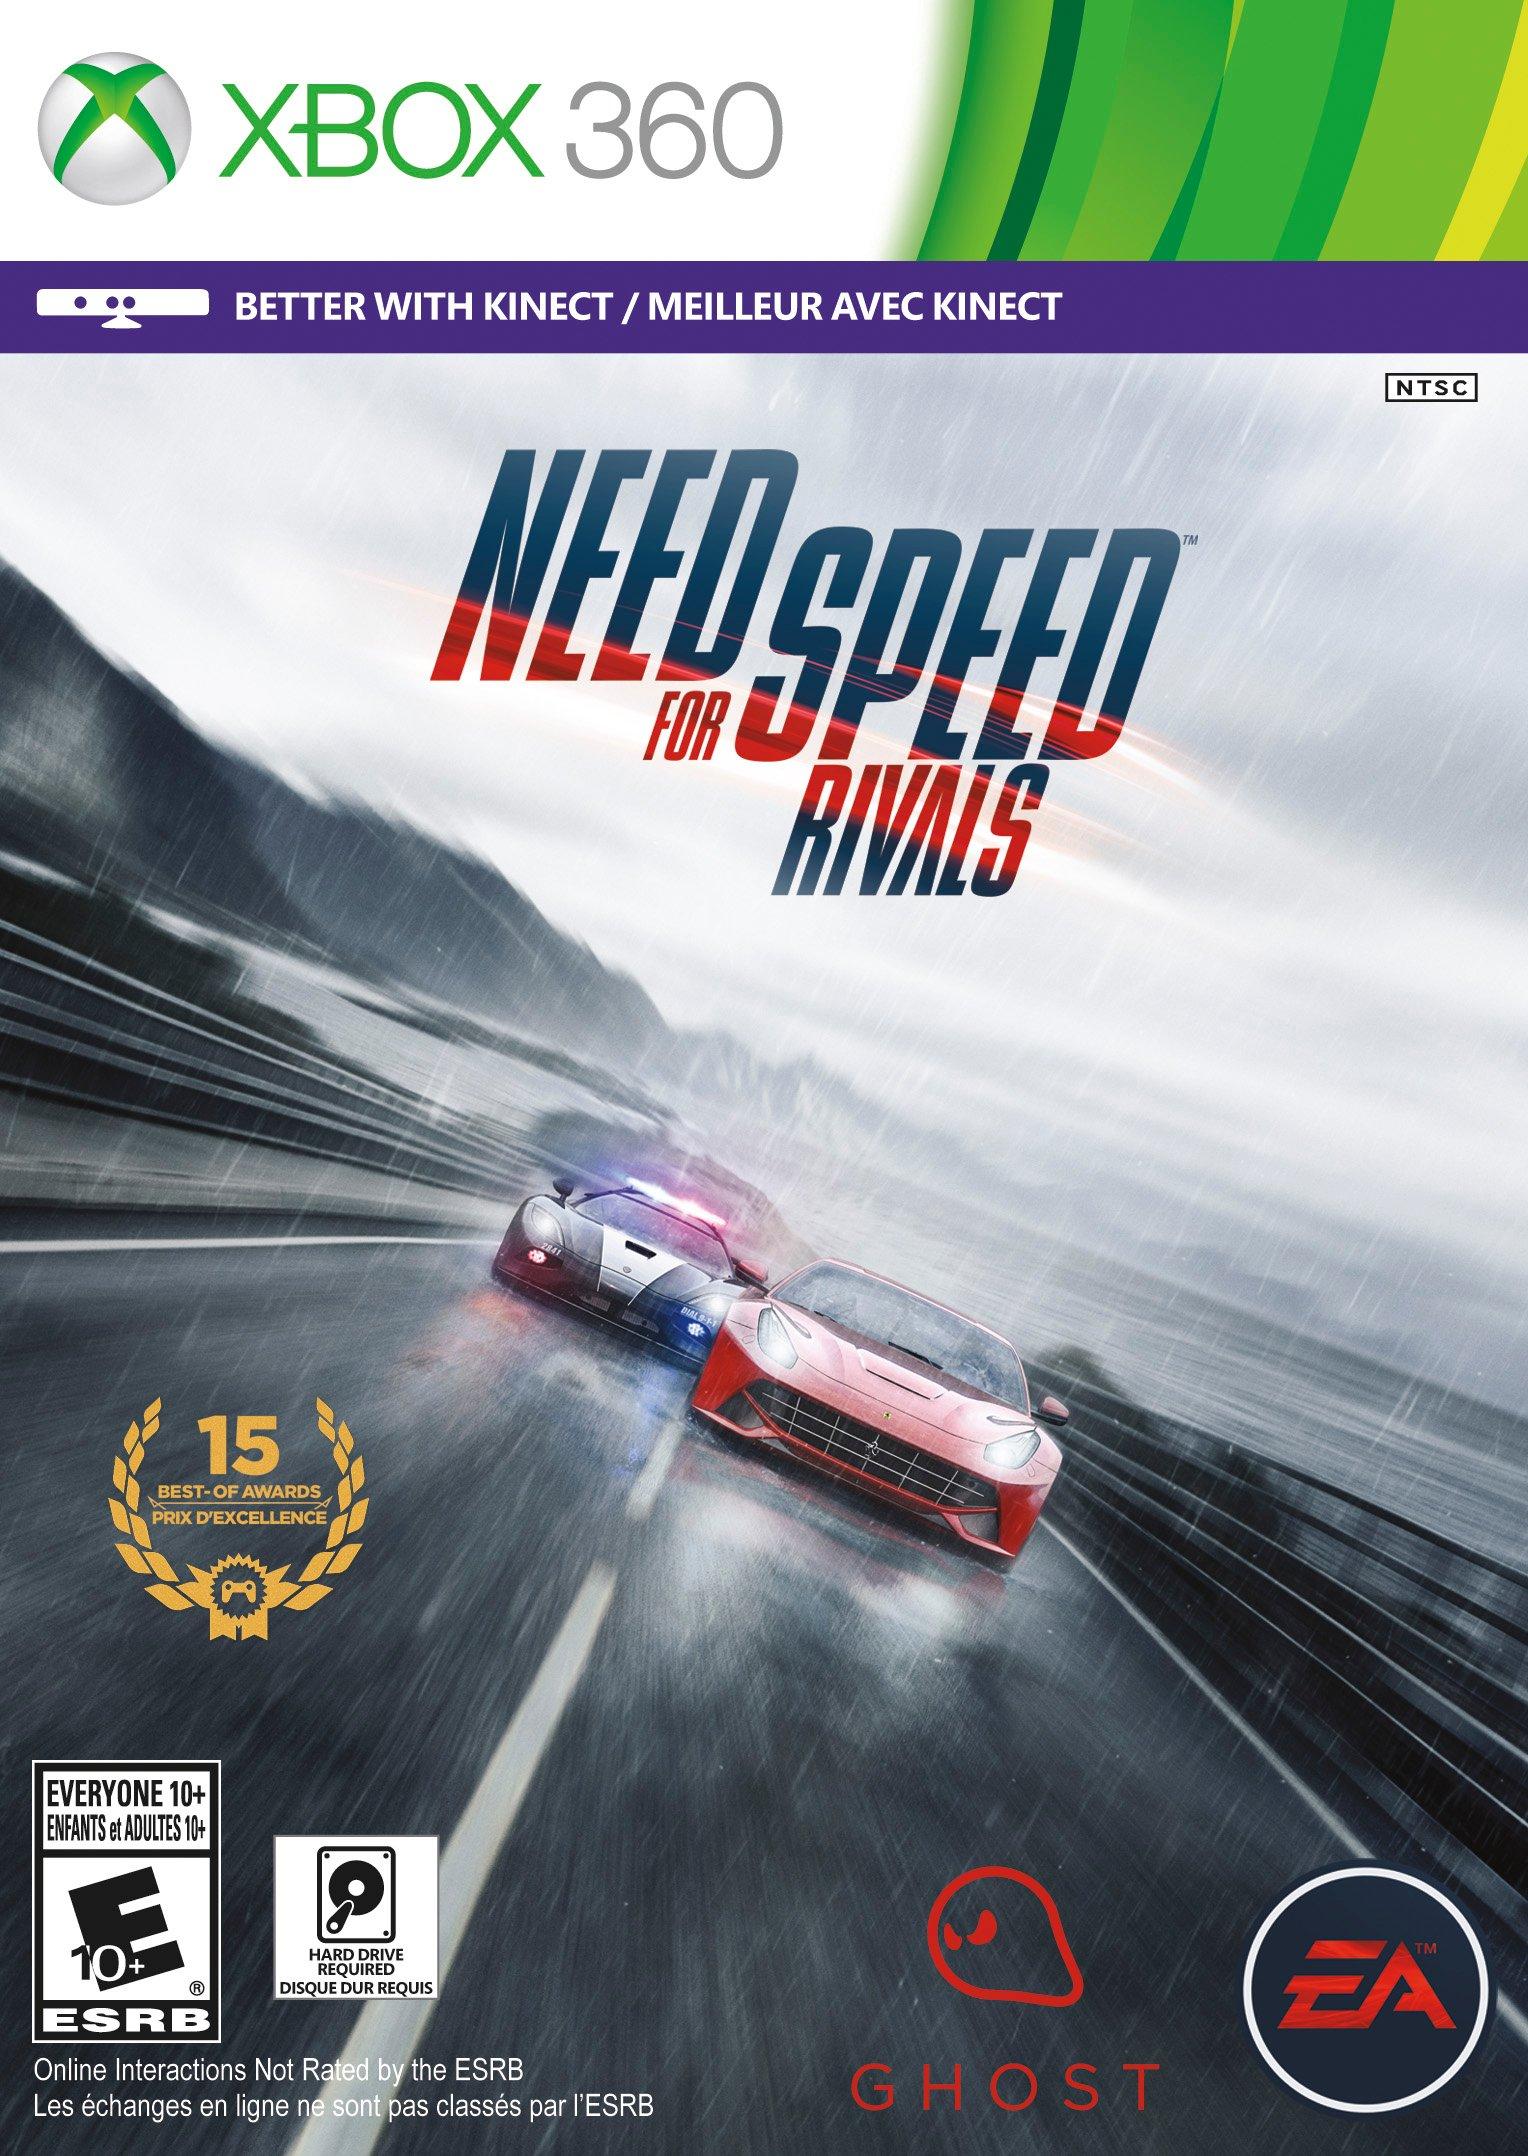 need for speed xbox 360